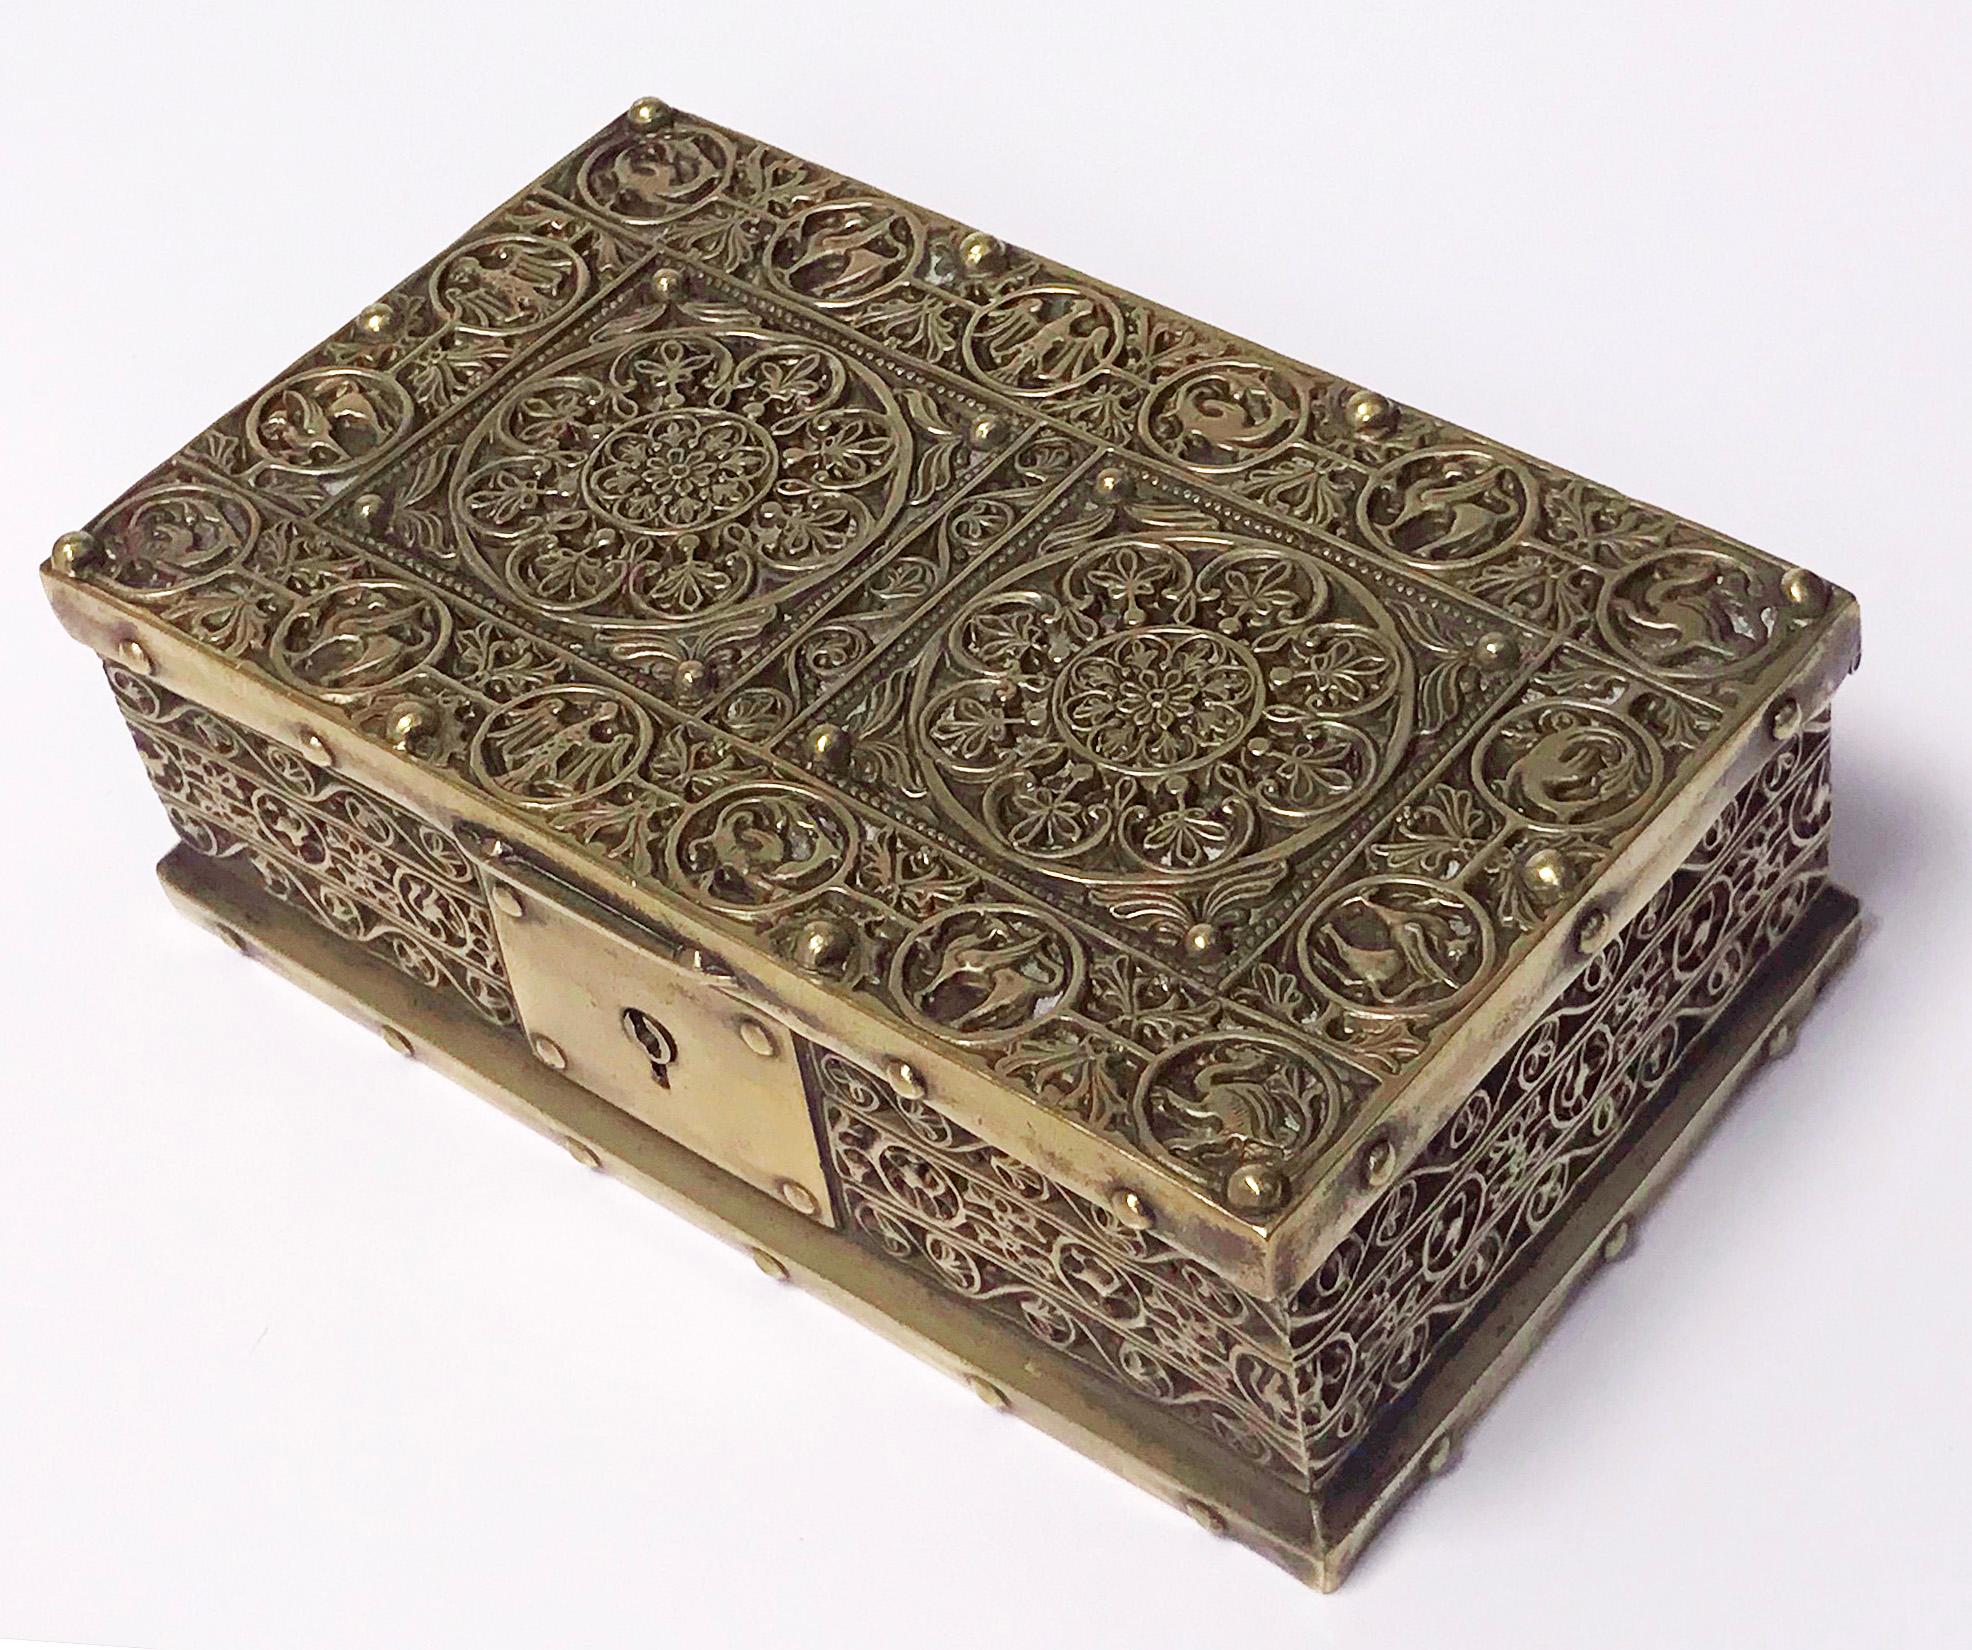 Brass Jewellery Box, Germany C.1920 probably Erhard & Söhne of Schwäbisch Gmünd. The box of rectangular shape, the brass body and cover oxidised inlay classic art nouveau arabesque decoration featuring panels with images of mythological creatures on